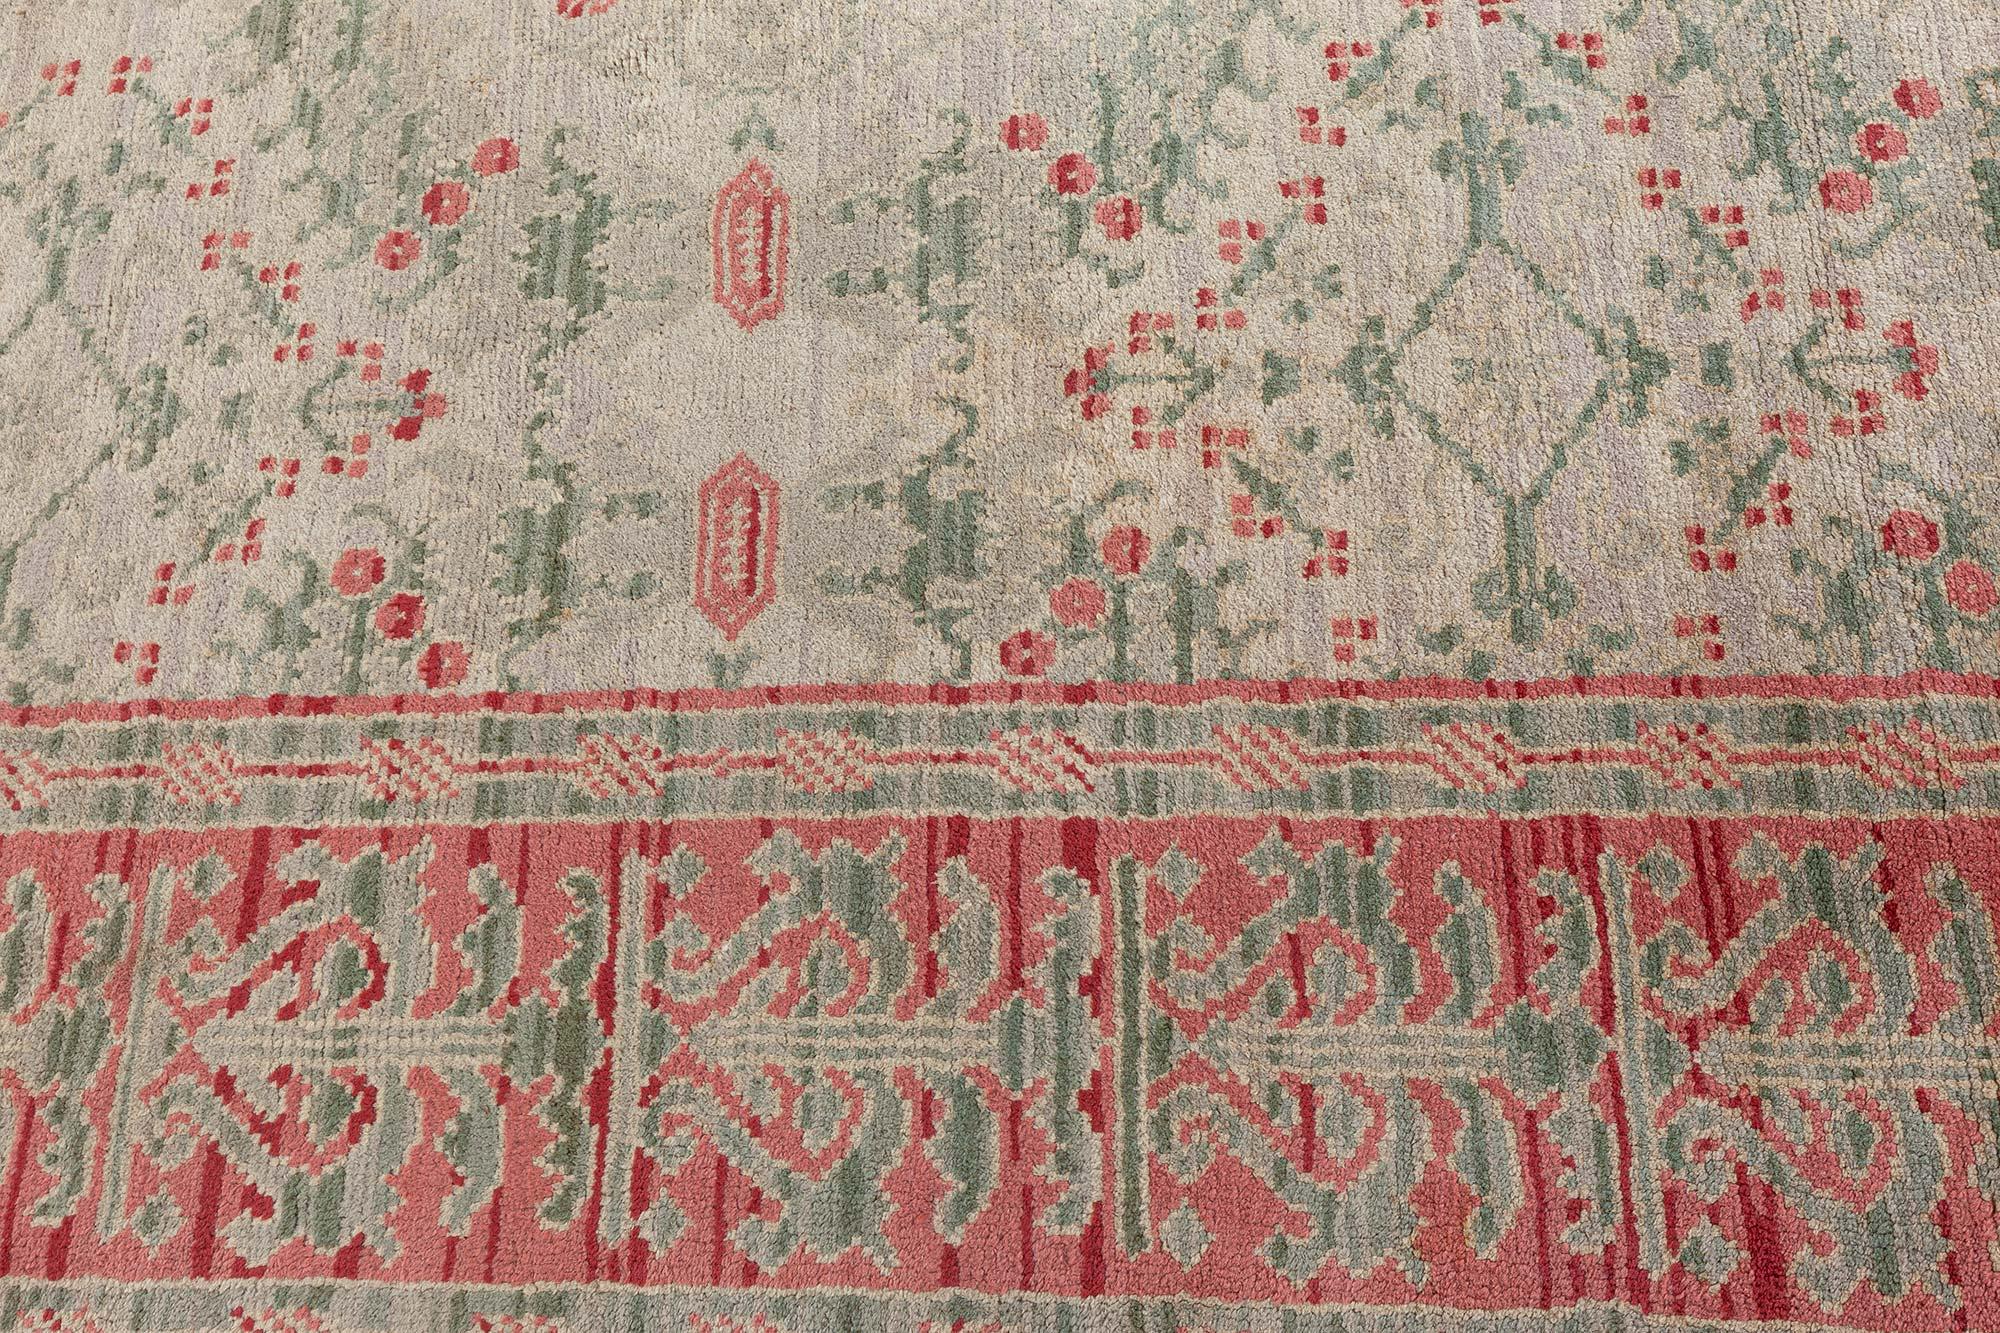 Hand-Woven Mid-20th century Spanish Floral Handmade Wool Rug For Sale